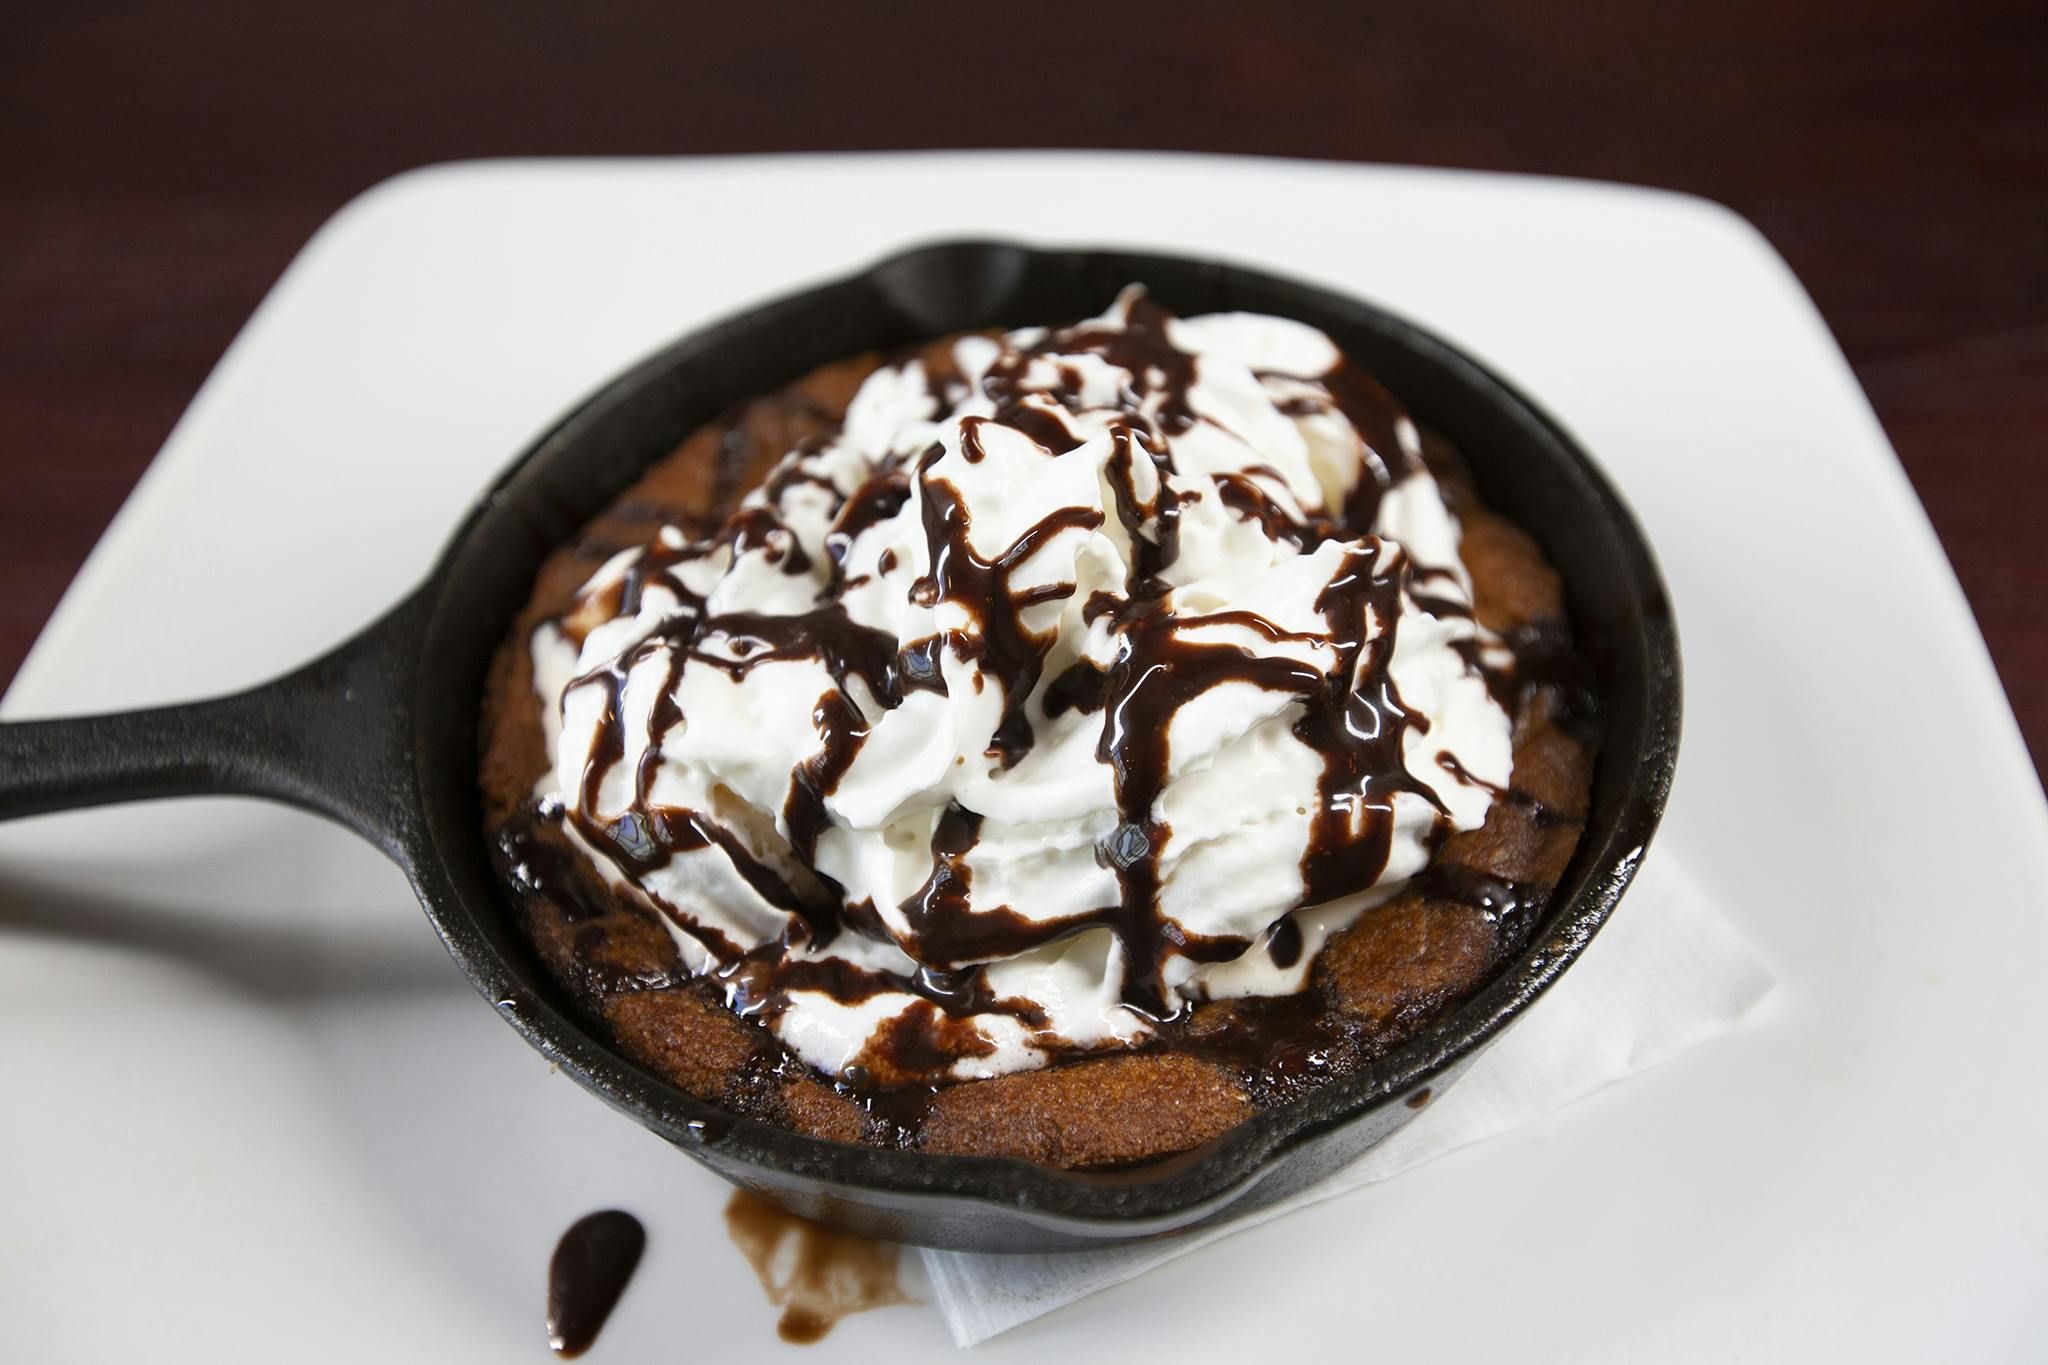 Cookie Skillet from Firehouse Grill - Chicago Ave in Evanston, IL